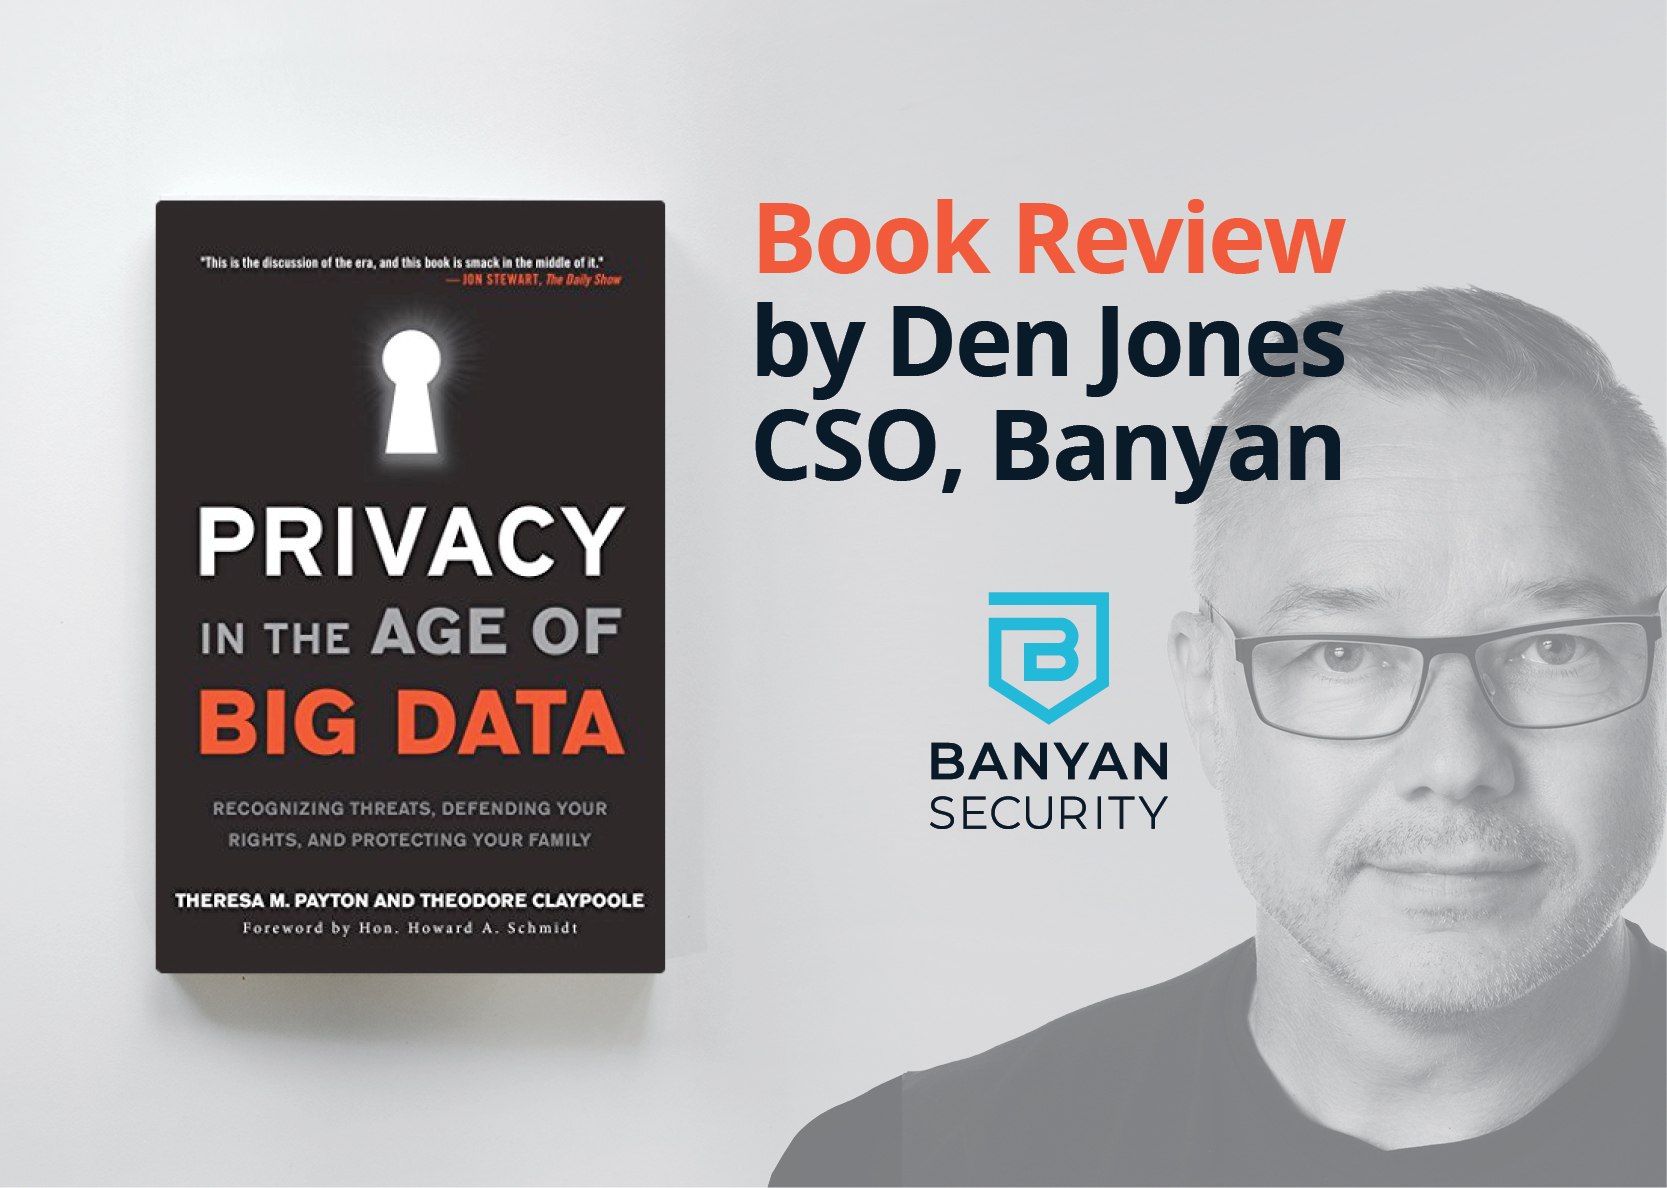 Privacy in the age of big data book review with Den Jones